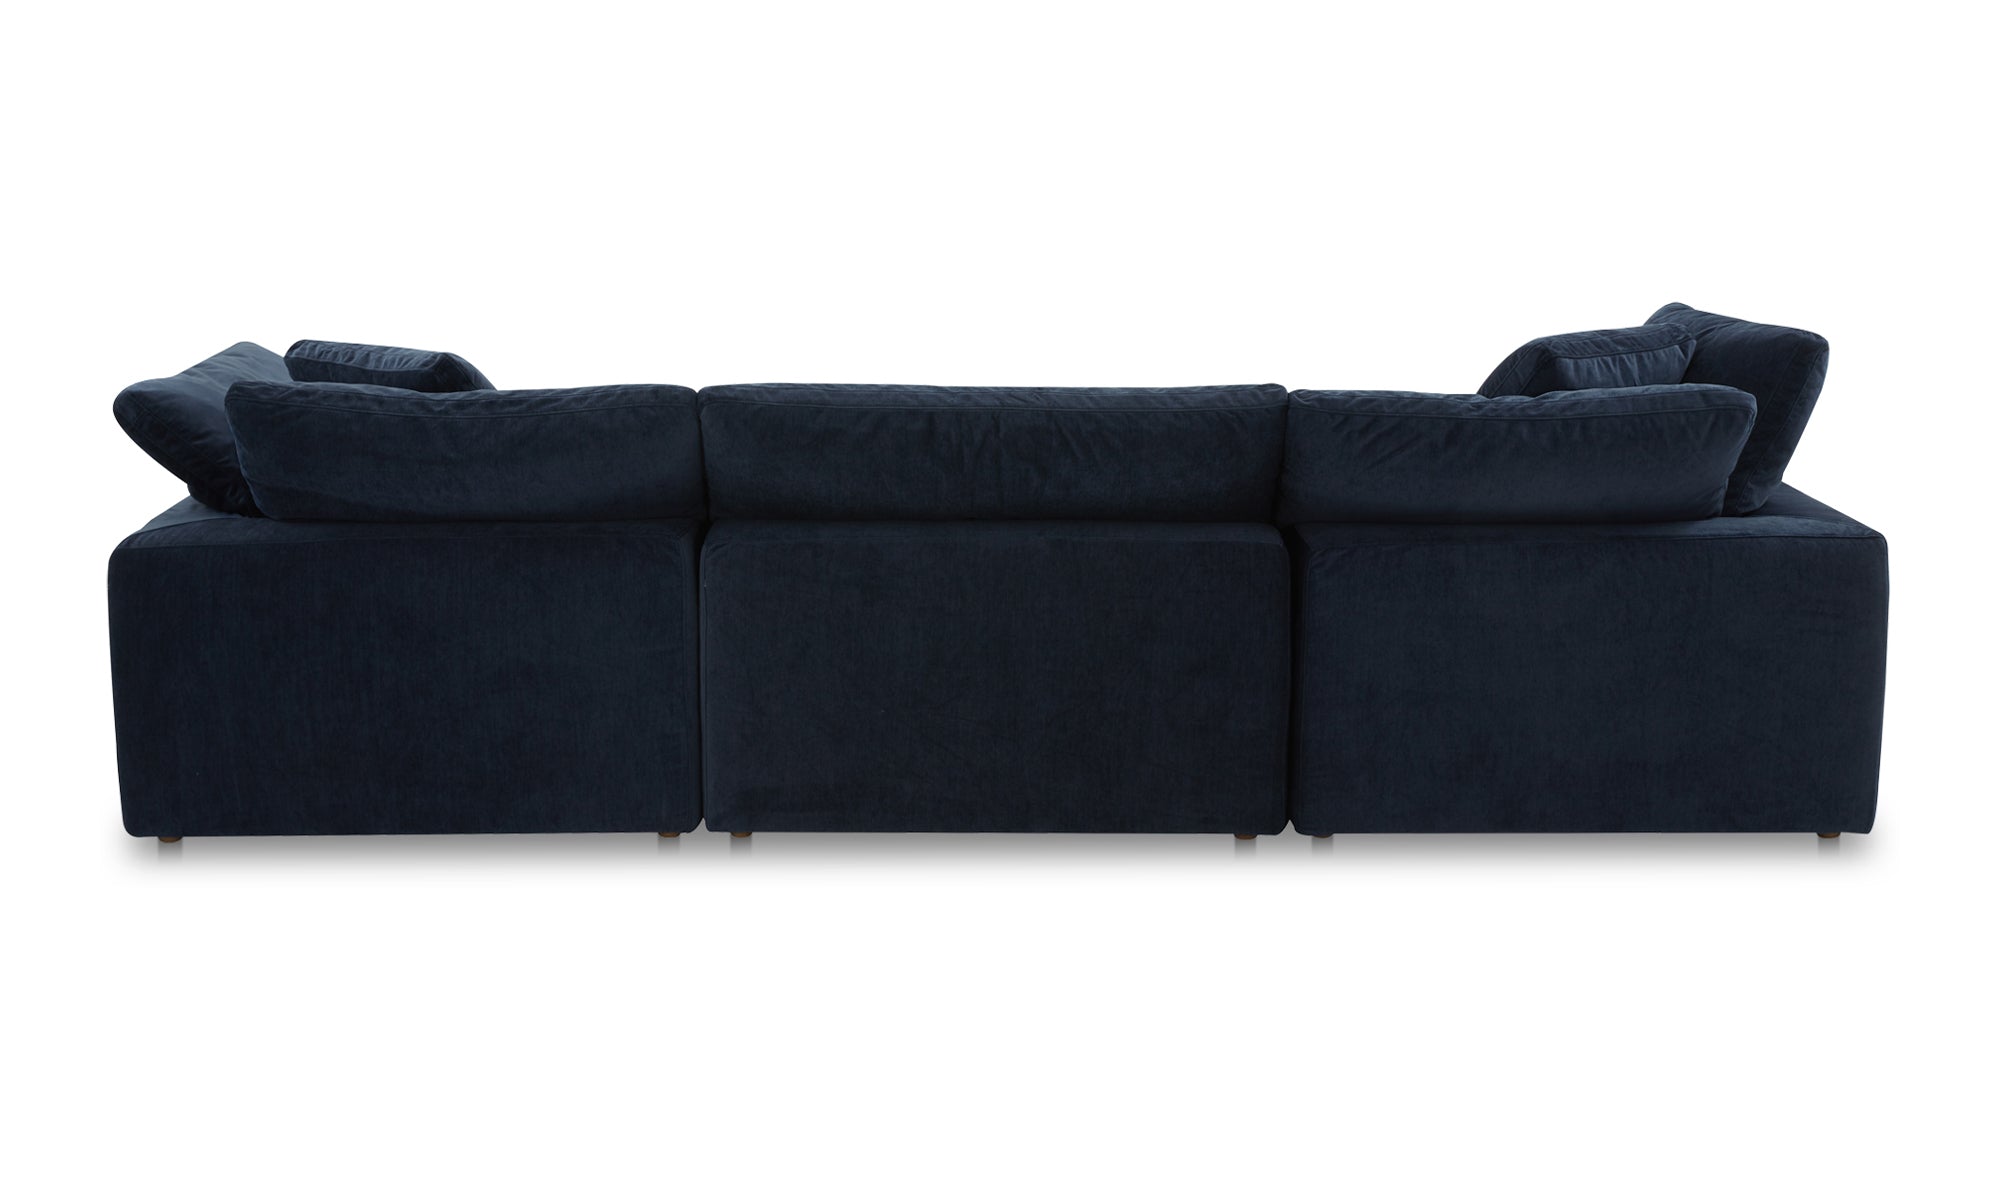 Clay Lounge Modular Sectional Performance Fabric - Nocturnal Sky